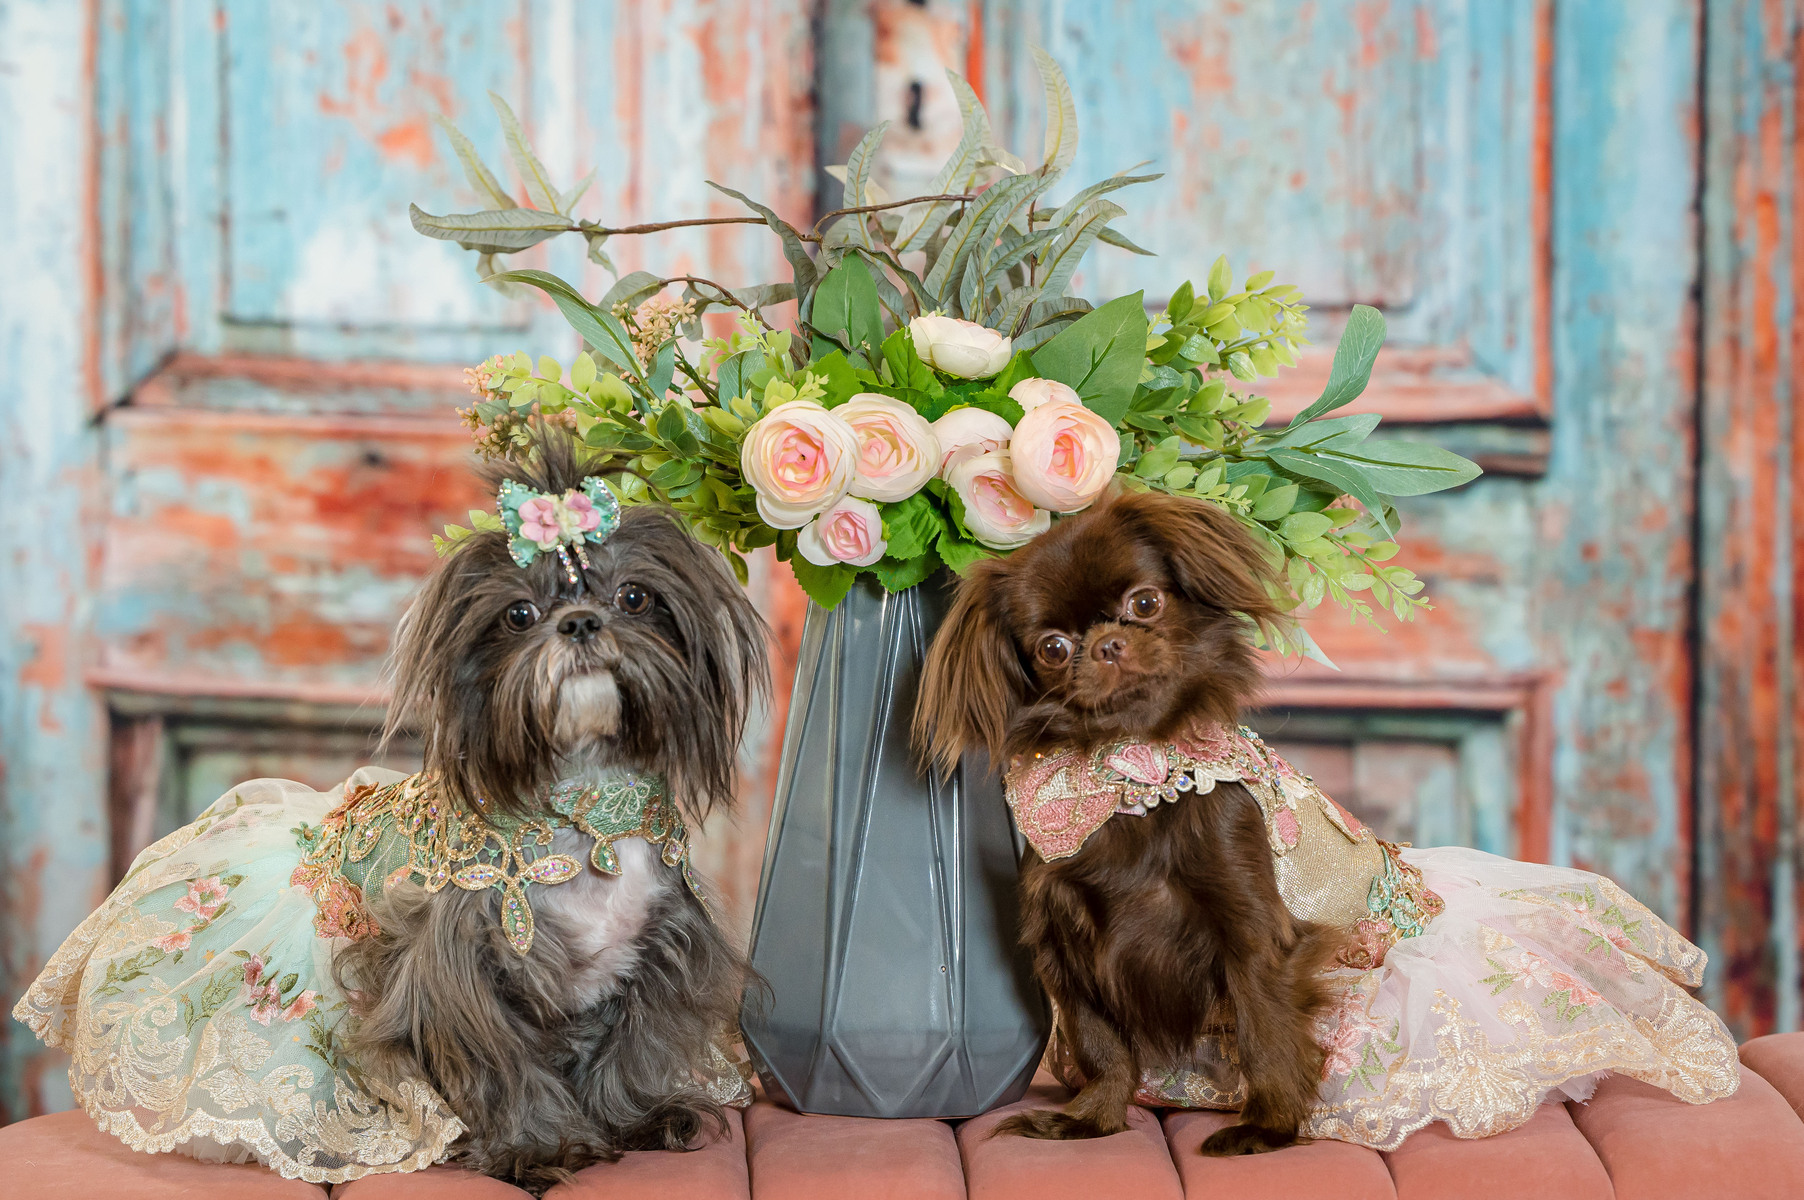 Call 561-307-9875 to make an appointment. Pet Fashion Photography Session